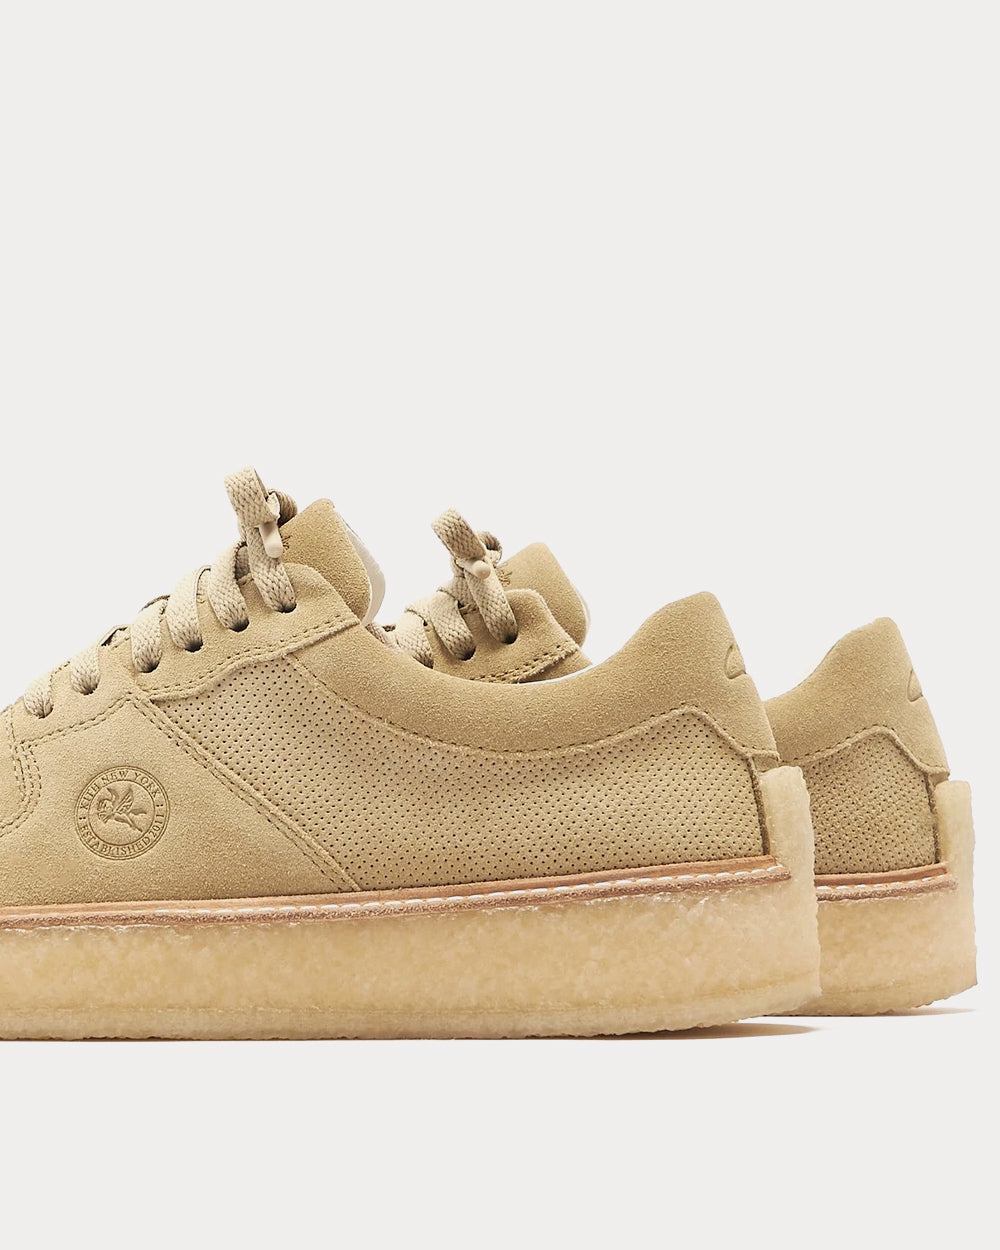 Clarks x Kith - Lockhill Suede Maple Low Top Sneakers